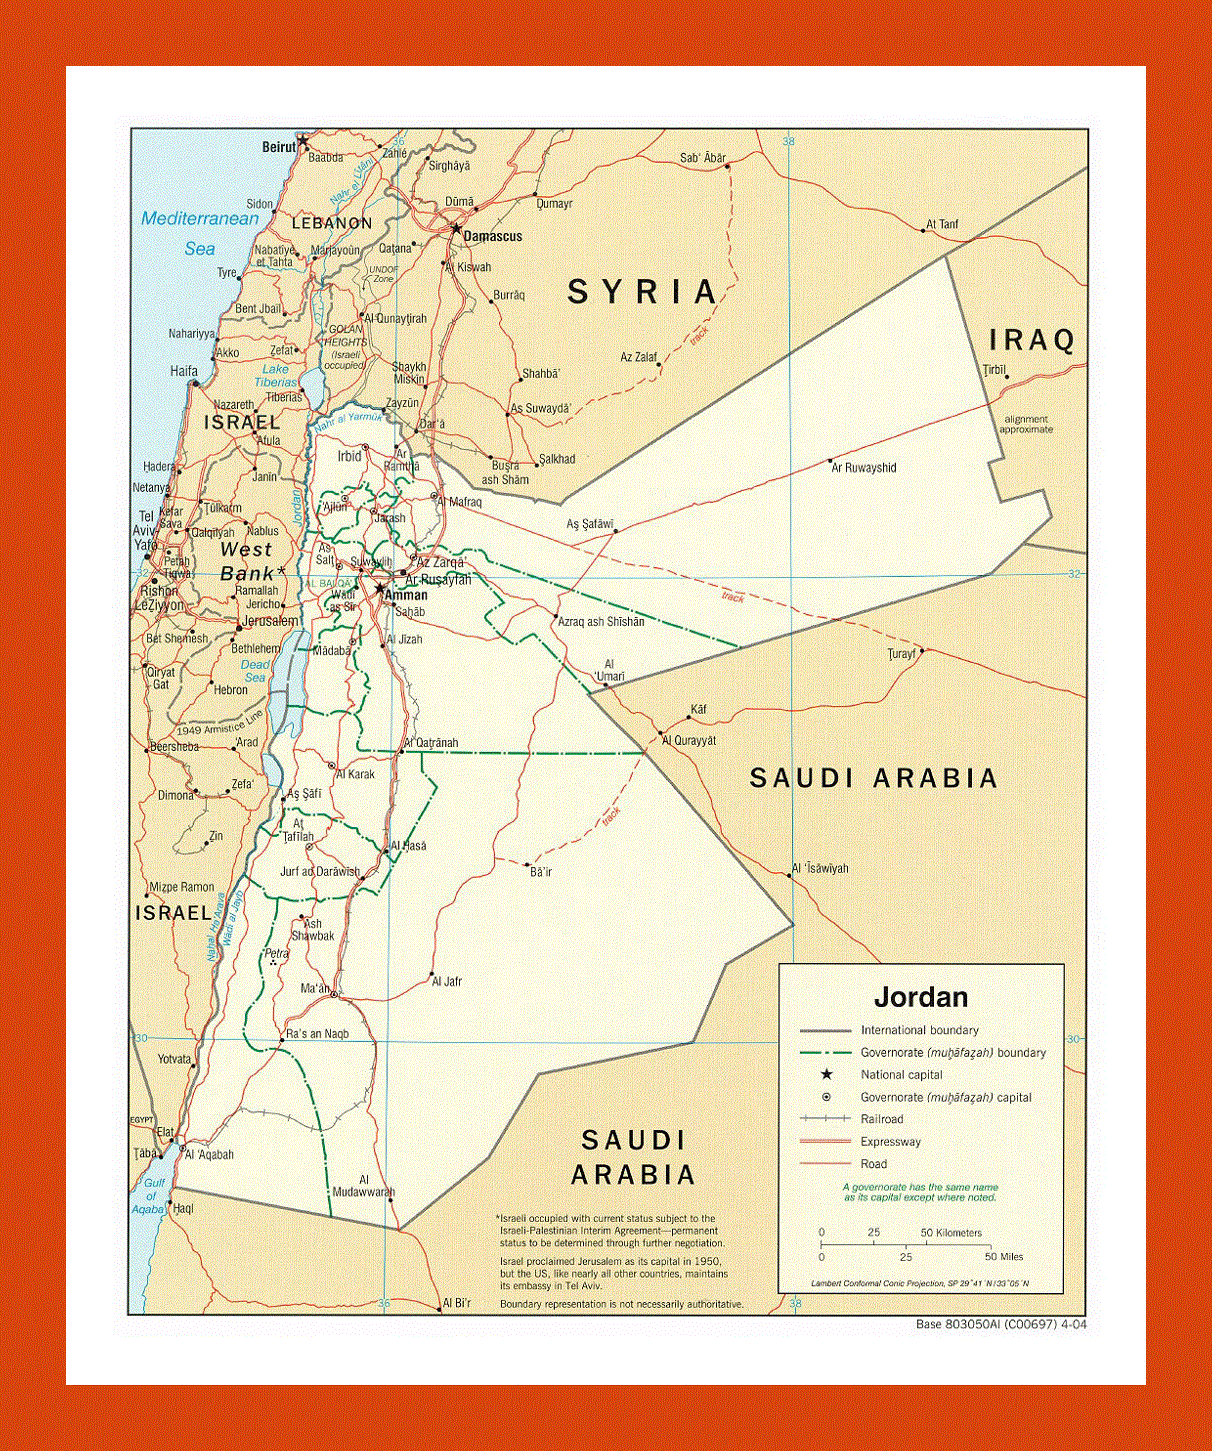 Political and administrative map of Jordan - 2004